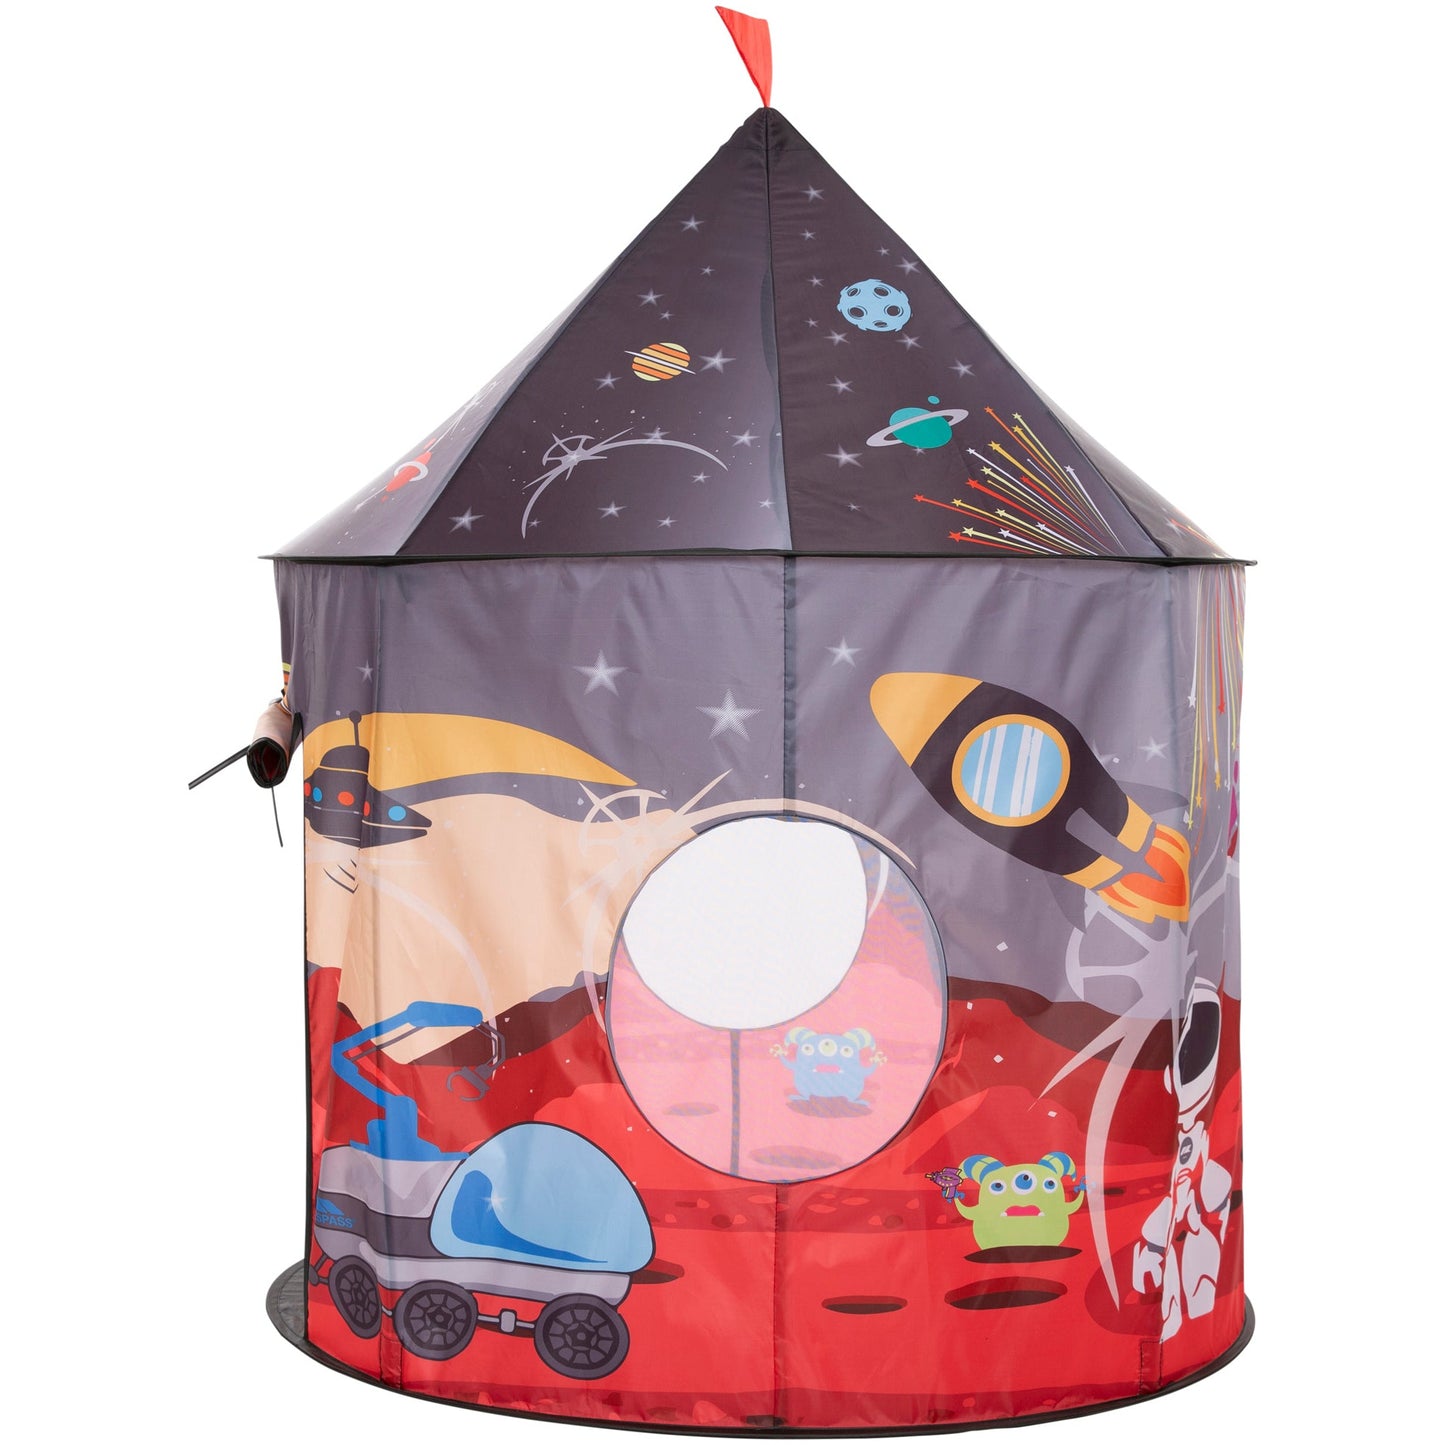 Chateau Kids' Indoor and Outdoor Play Tent - Space Print